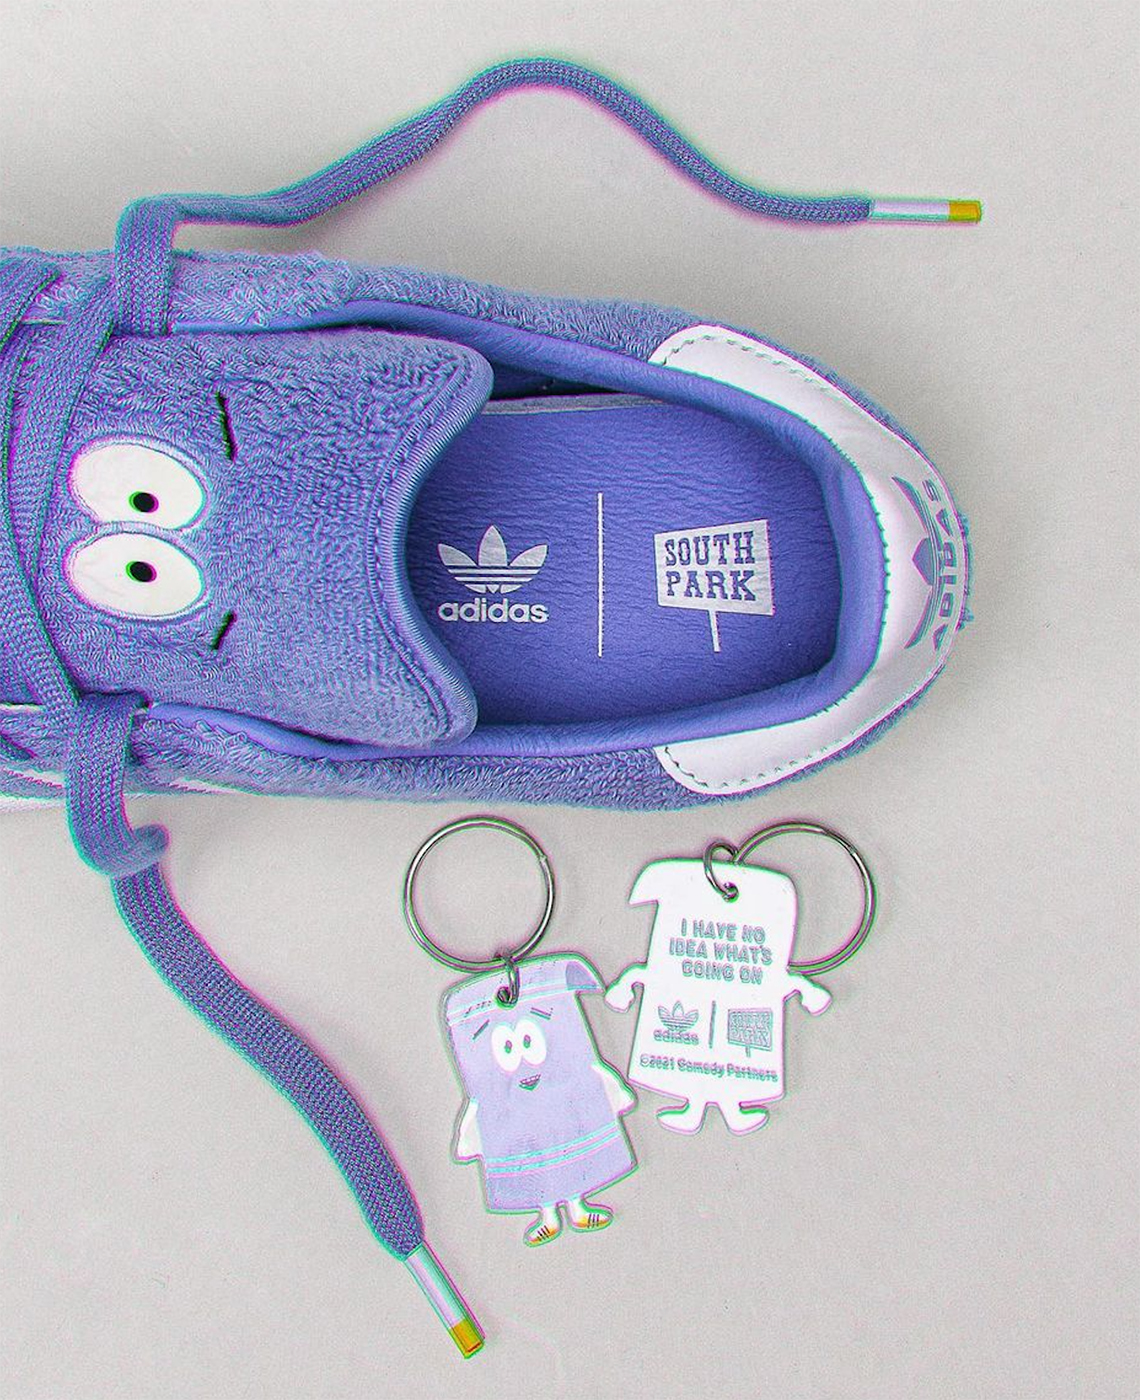 Towelie track adidas South Park Shoes Release Date 3